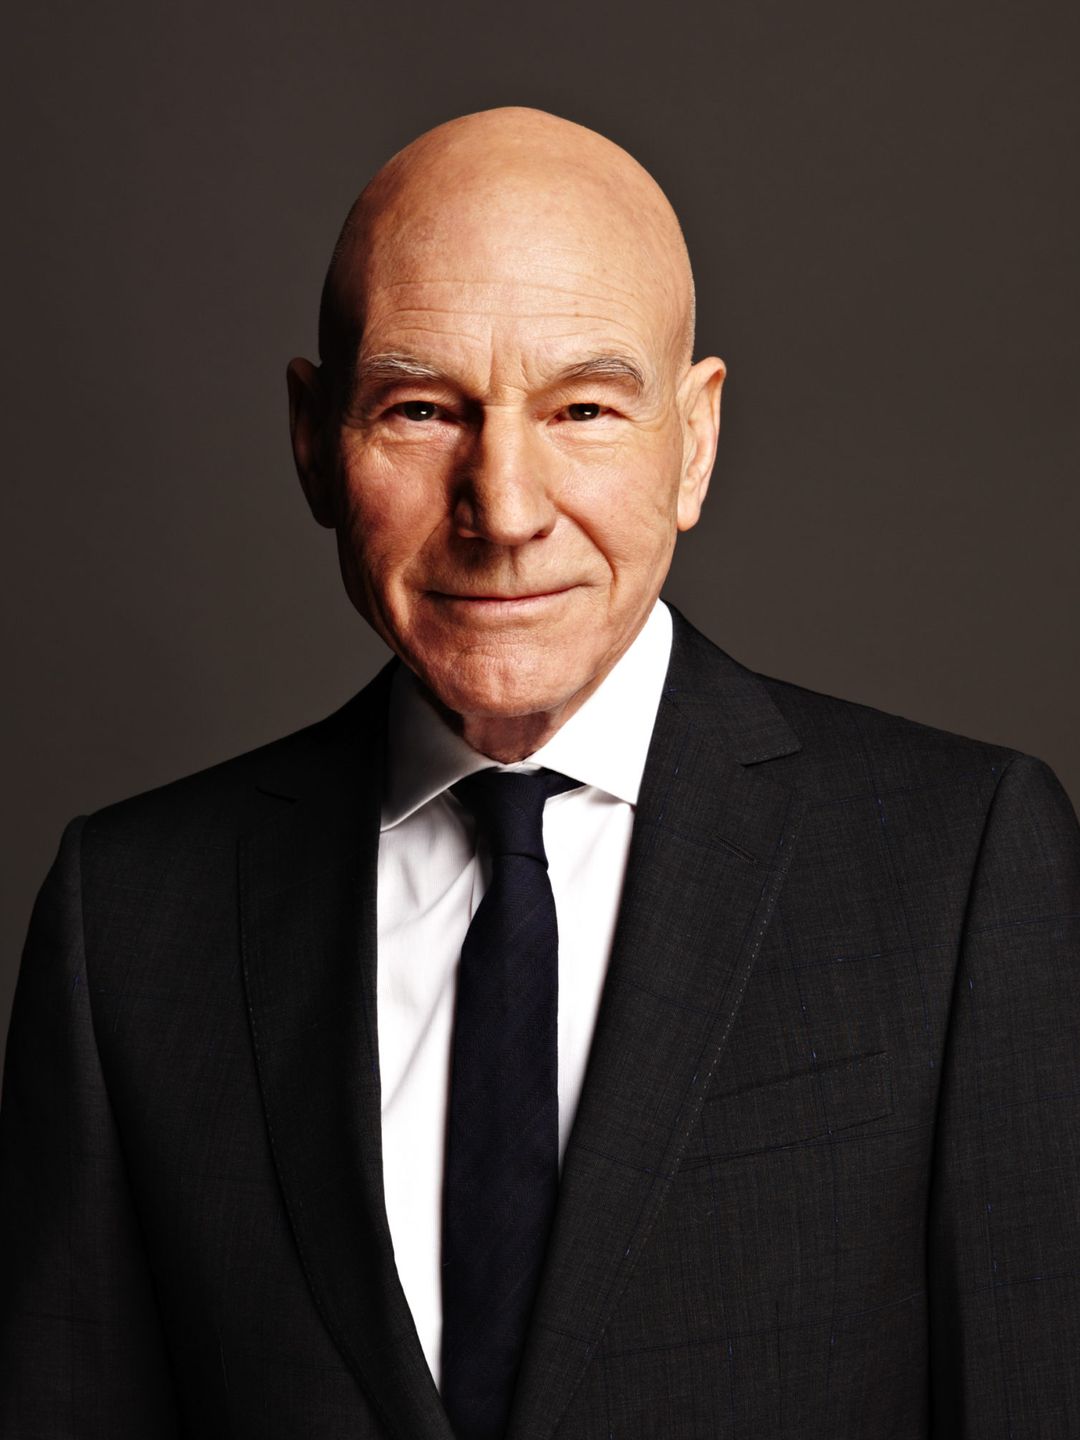 Patrick Stewart how did he became famous